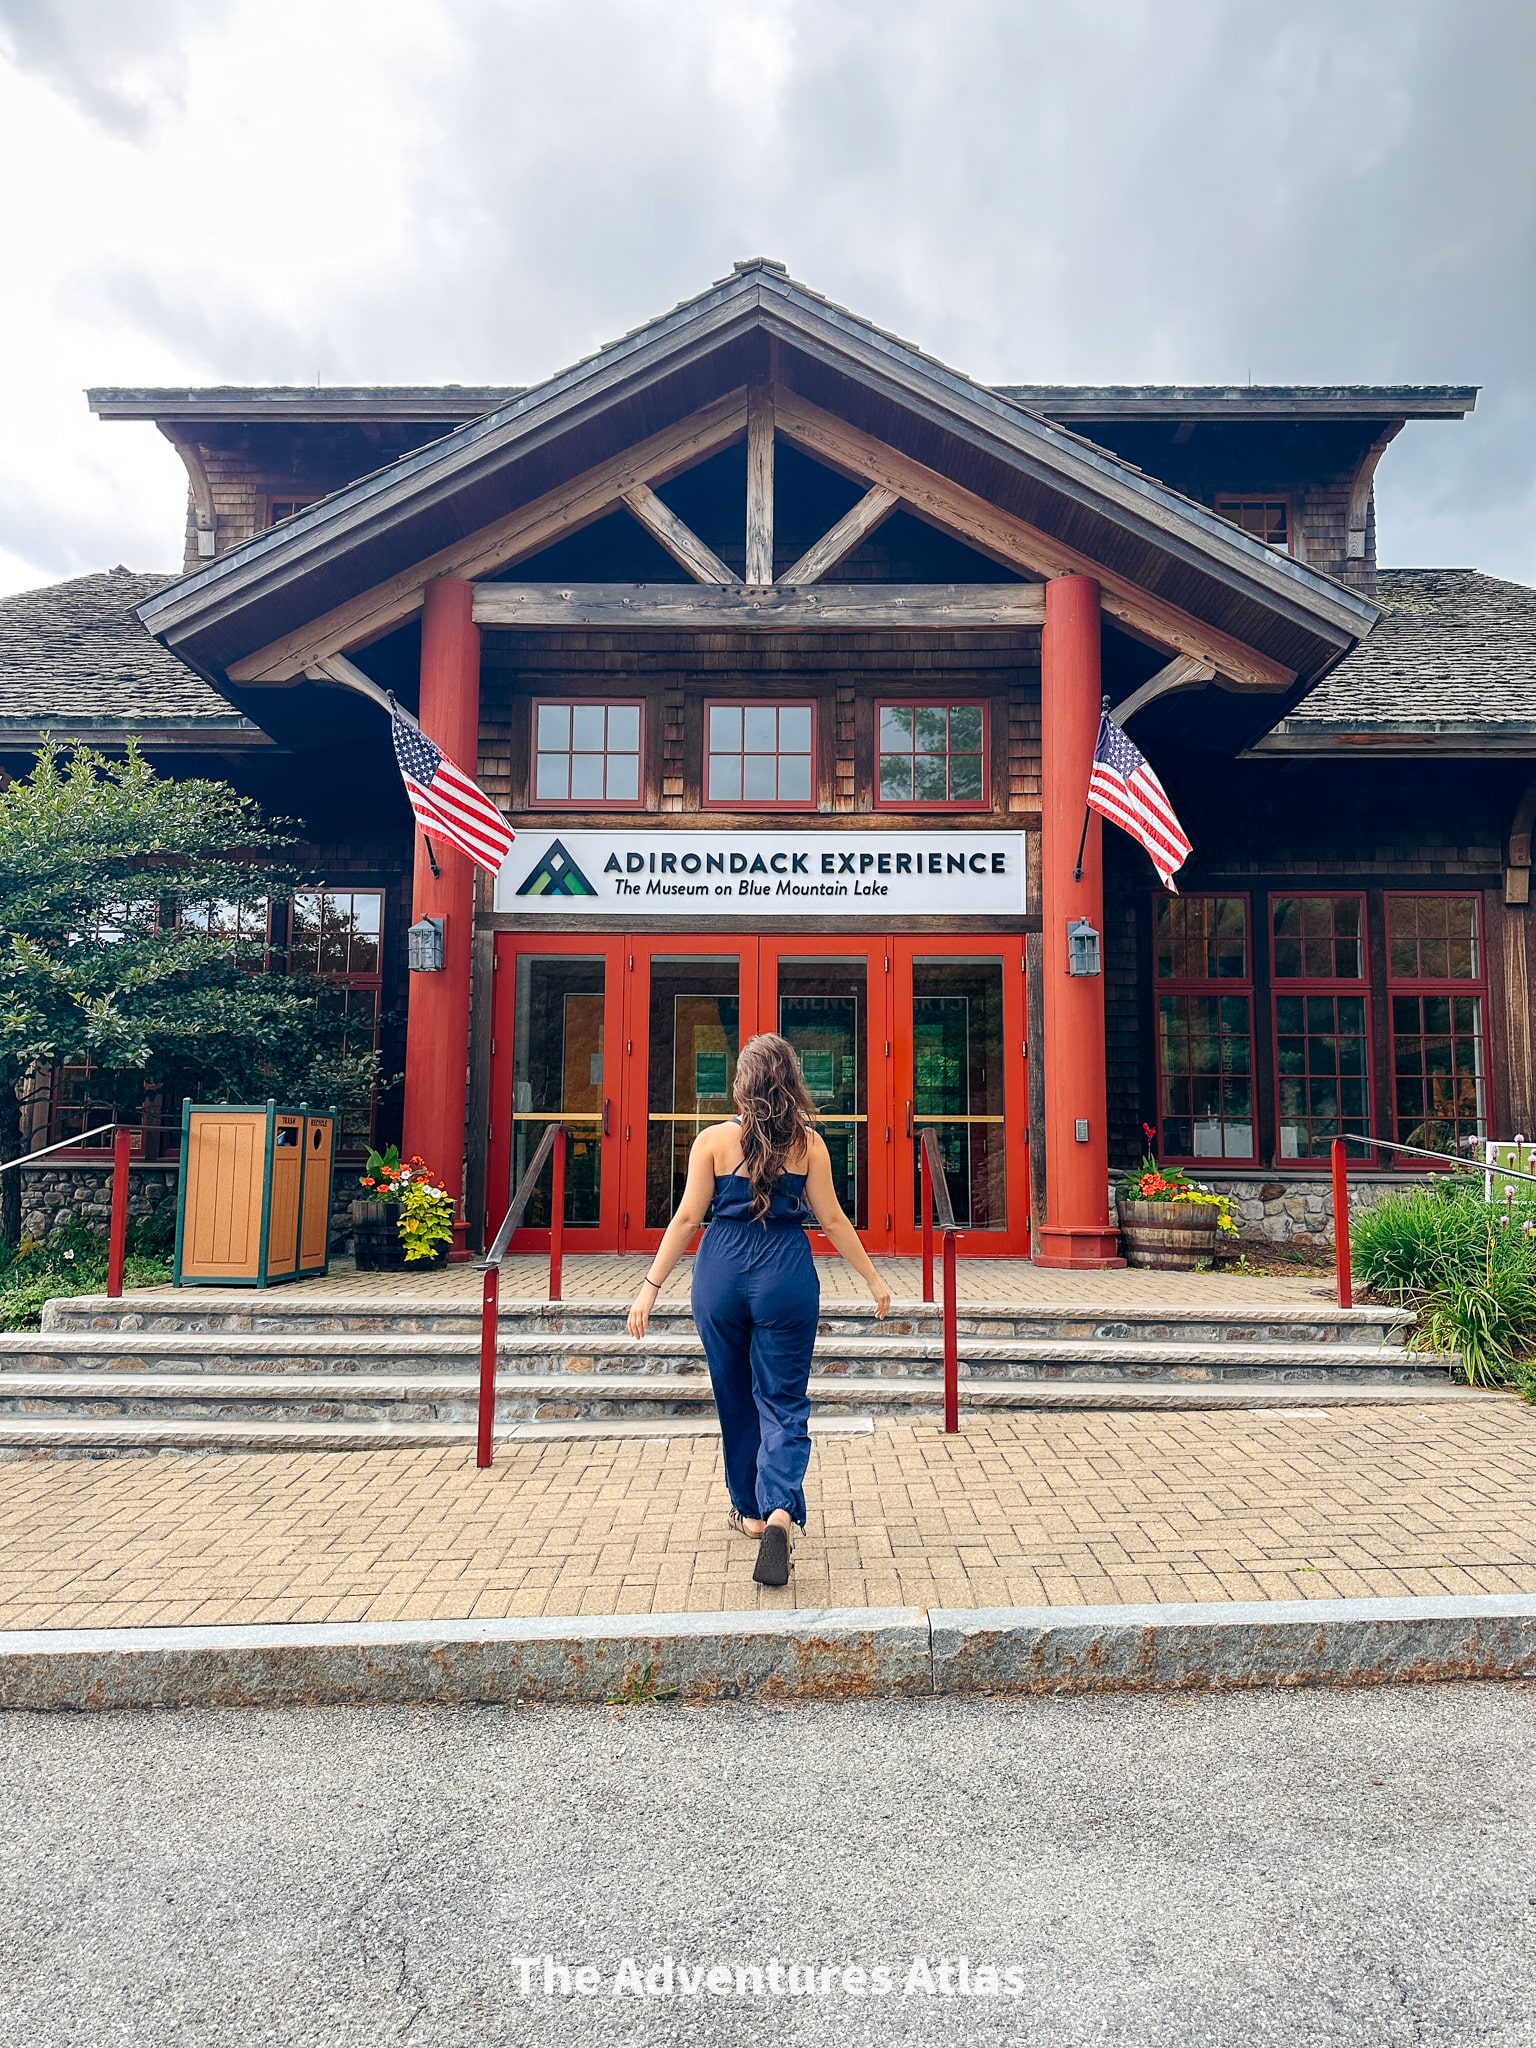 Visiting the Adirondack Experience Museum is the best thing to do in Lake Placid in the summer